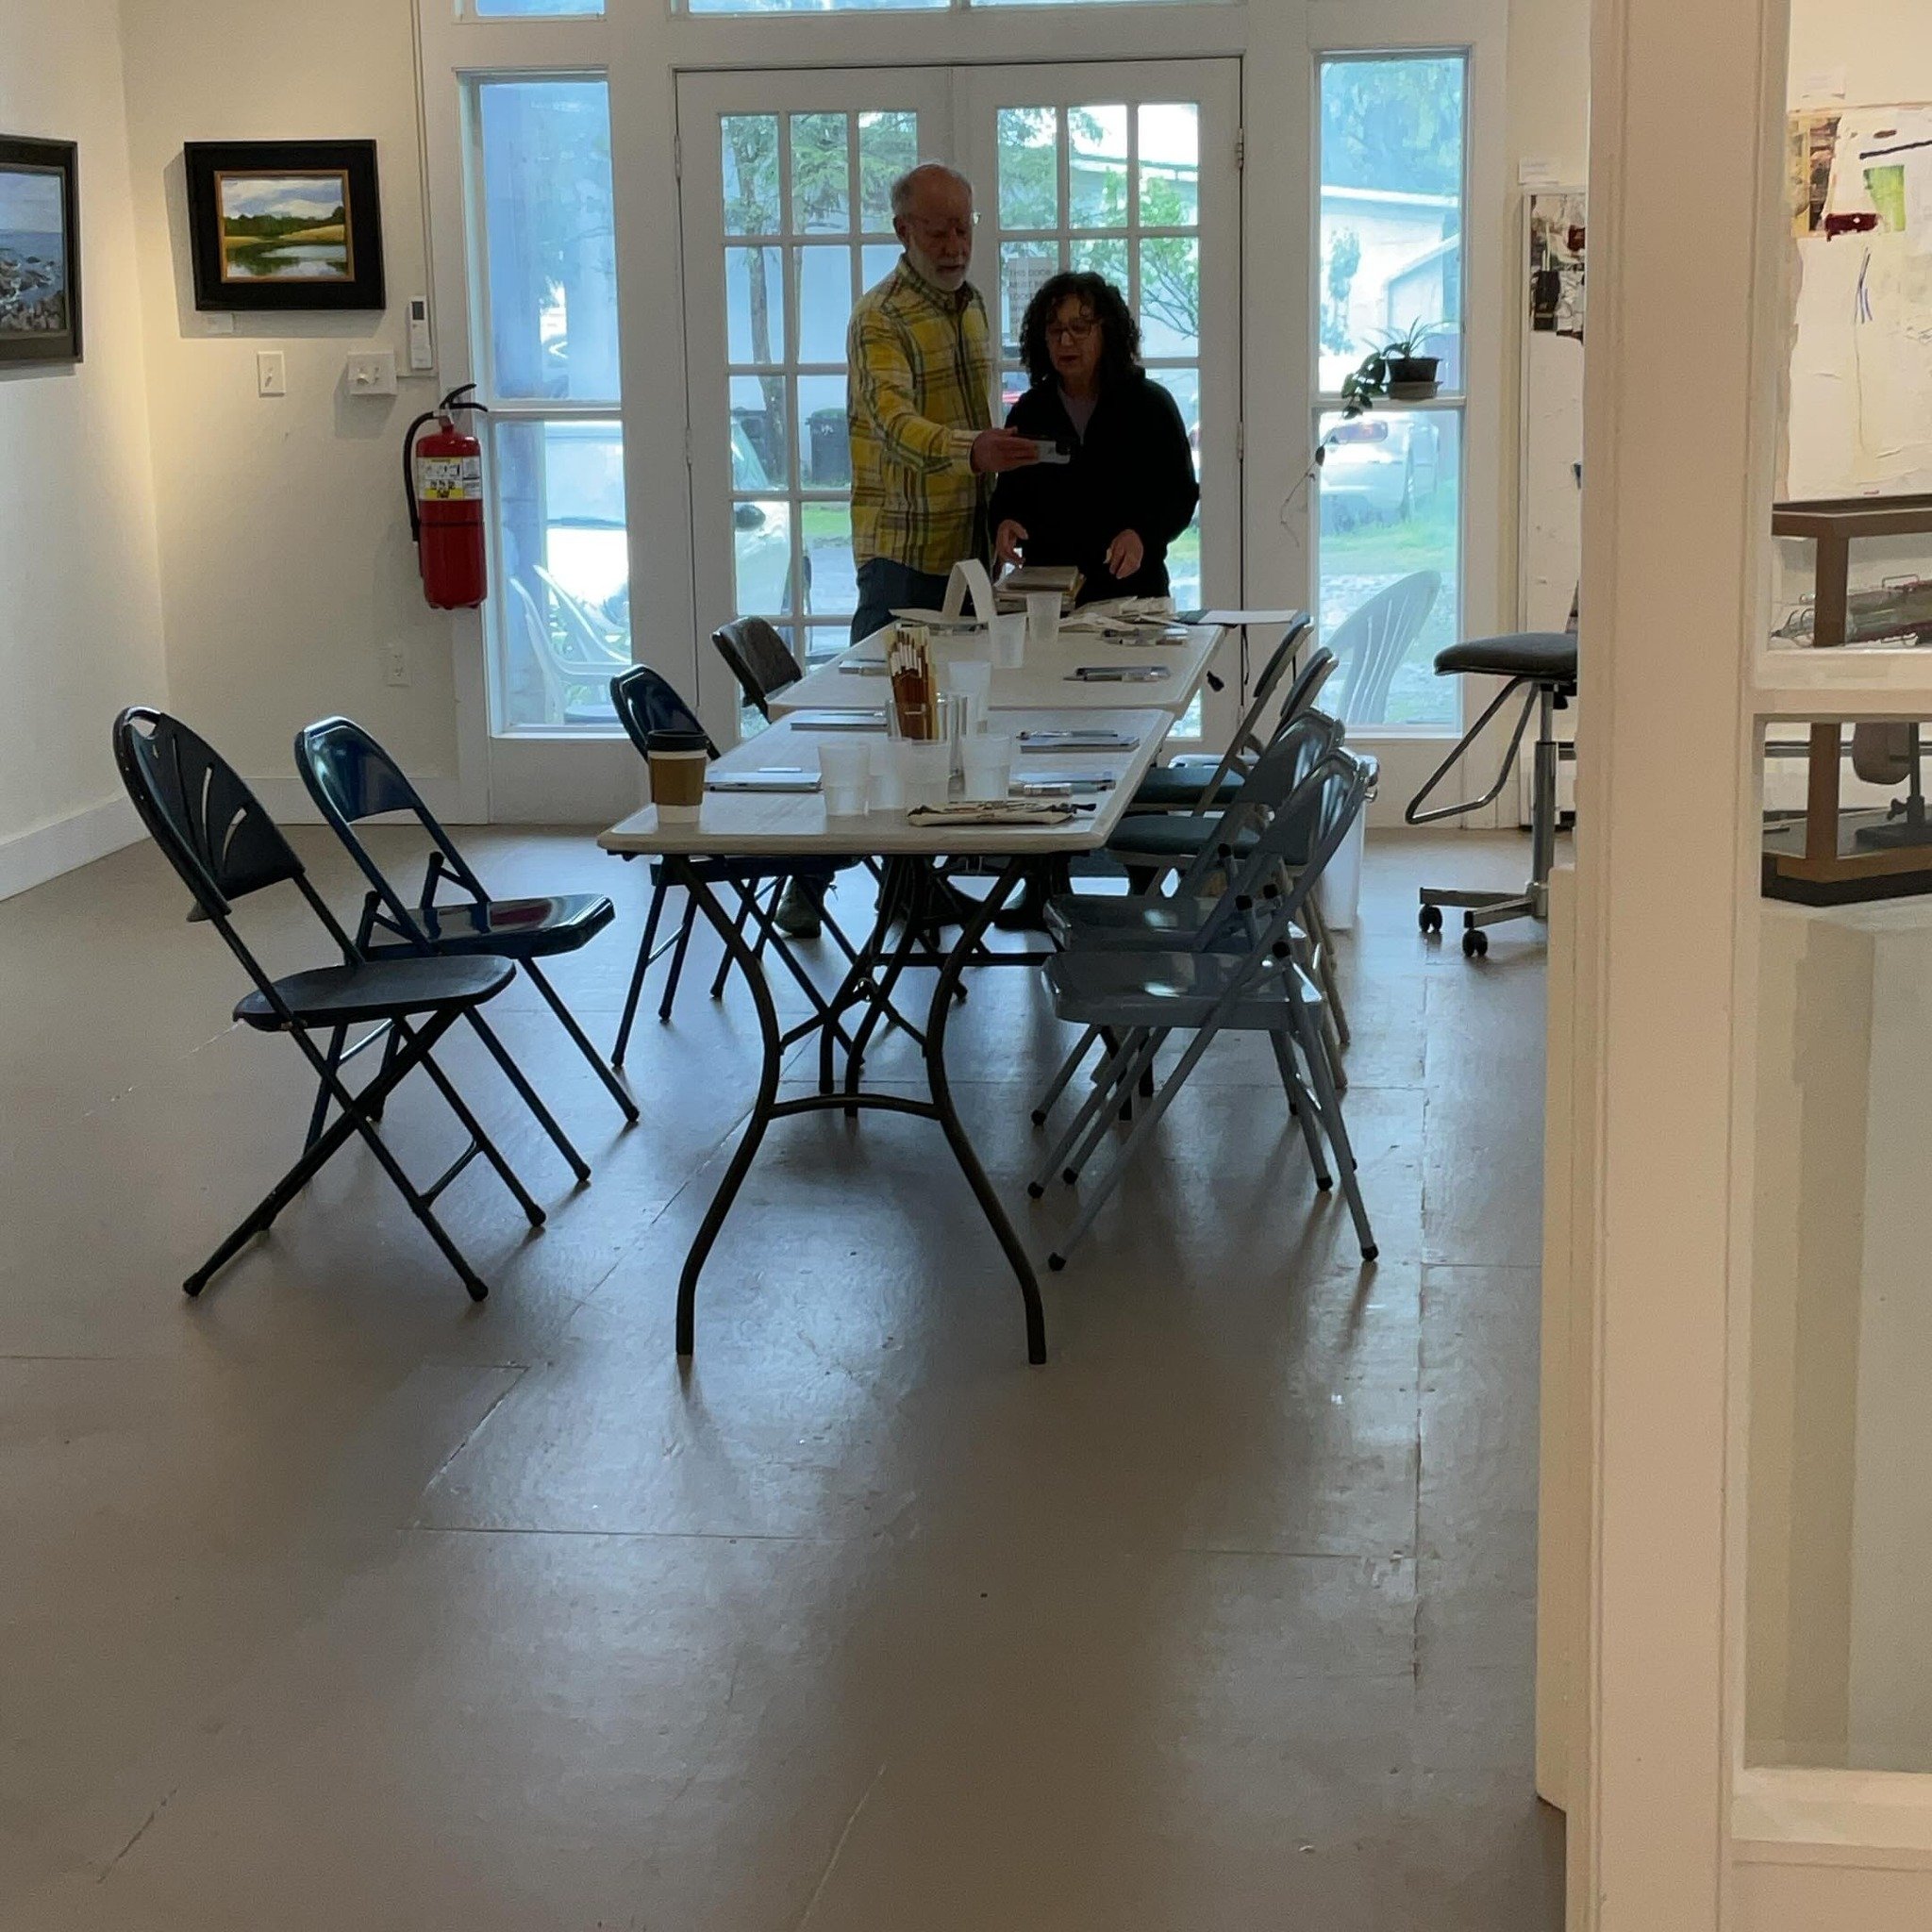 Getting ready for workshop with Wendy Hollander  1:30 still time to come and join!  15.00 supplies provided come add some brightness of botanicals to  a dreary day #locartist #tivolinow#destinationtivoli#hudsonvalleyhappenings#botanicalart #dutchessc